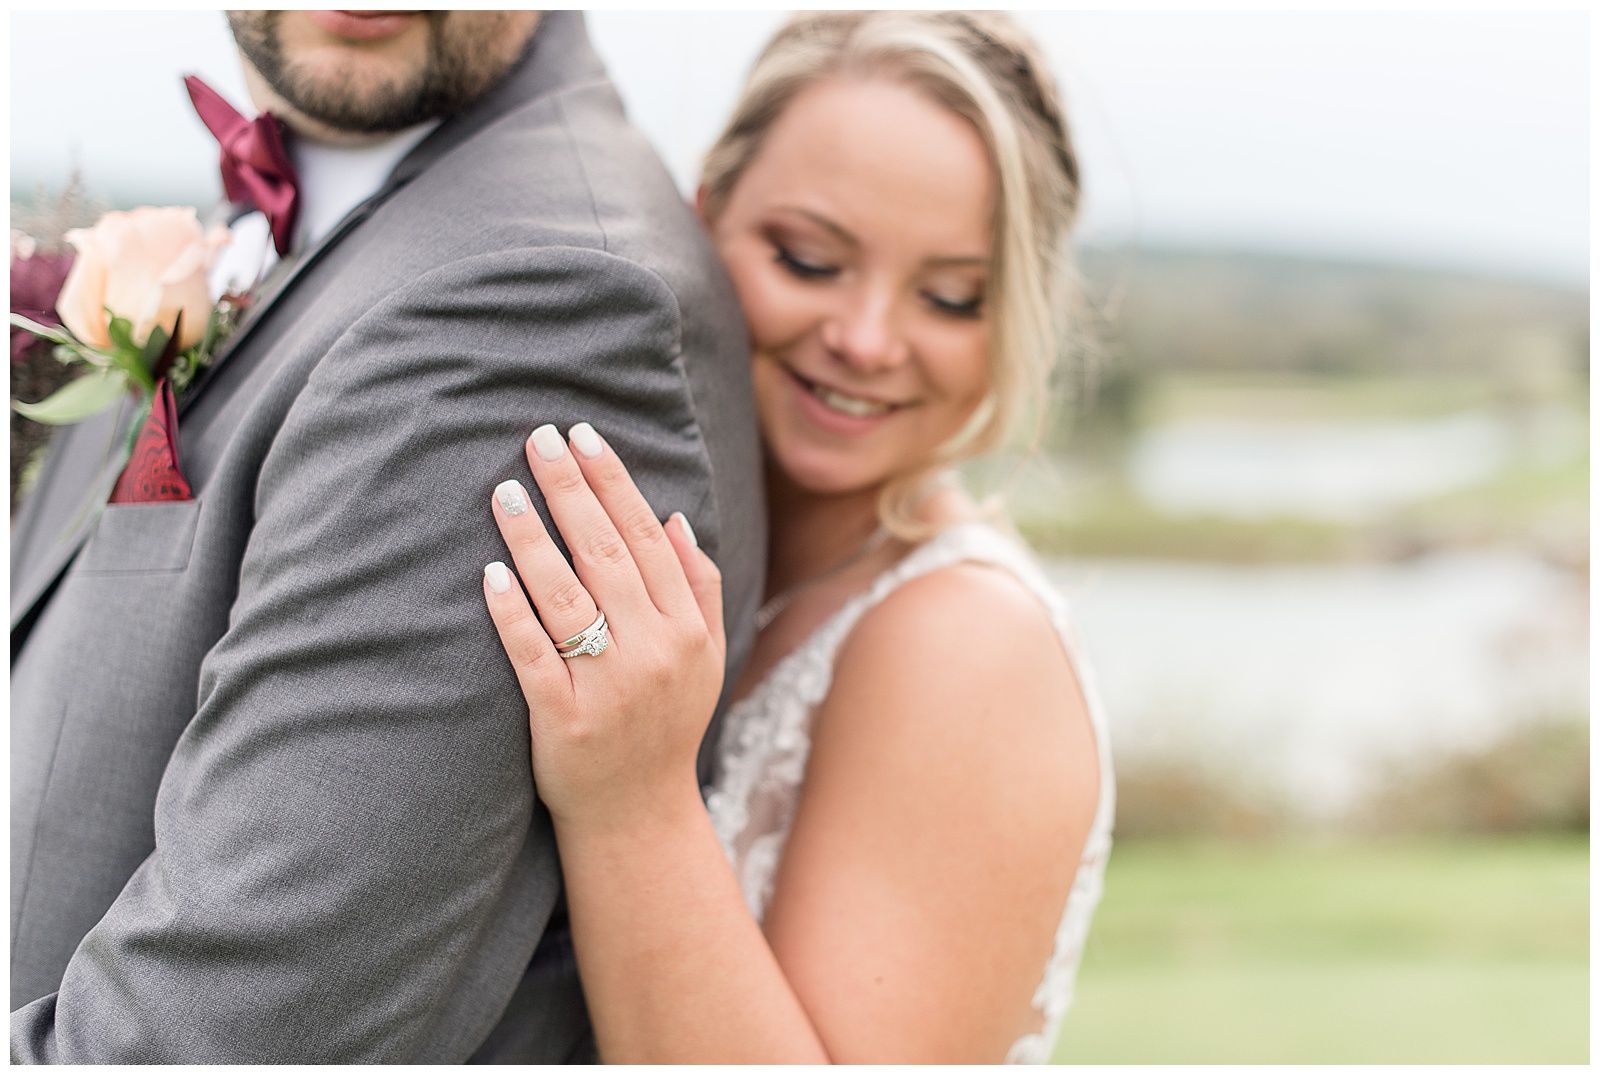 bride hugging her groom from behind smiling and looking down displaying her wedding ring on his arm